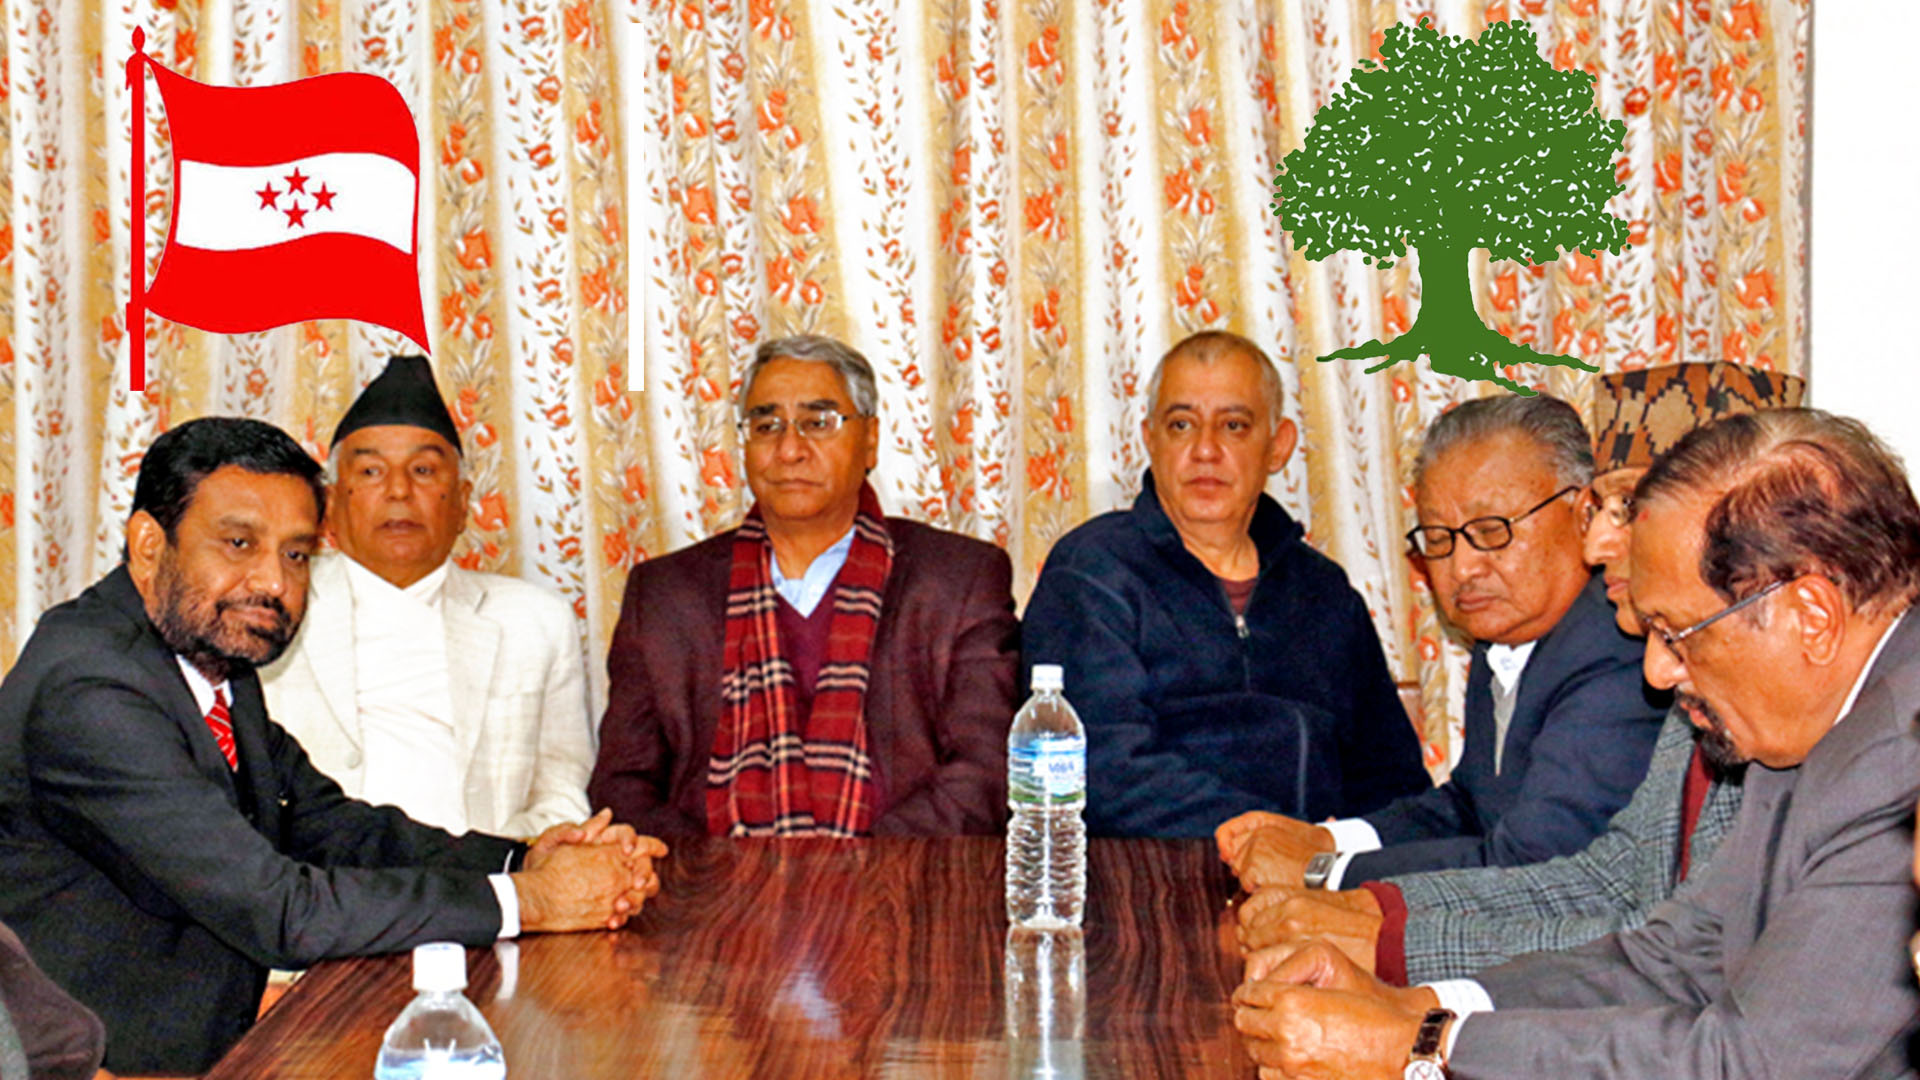 The main opposition Nepali Congress has demanded the government to convene an immediate parliamentary session